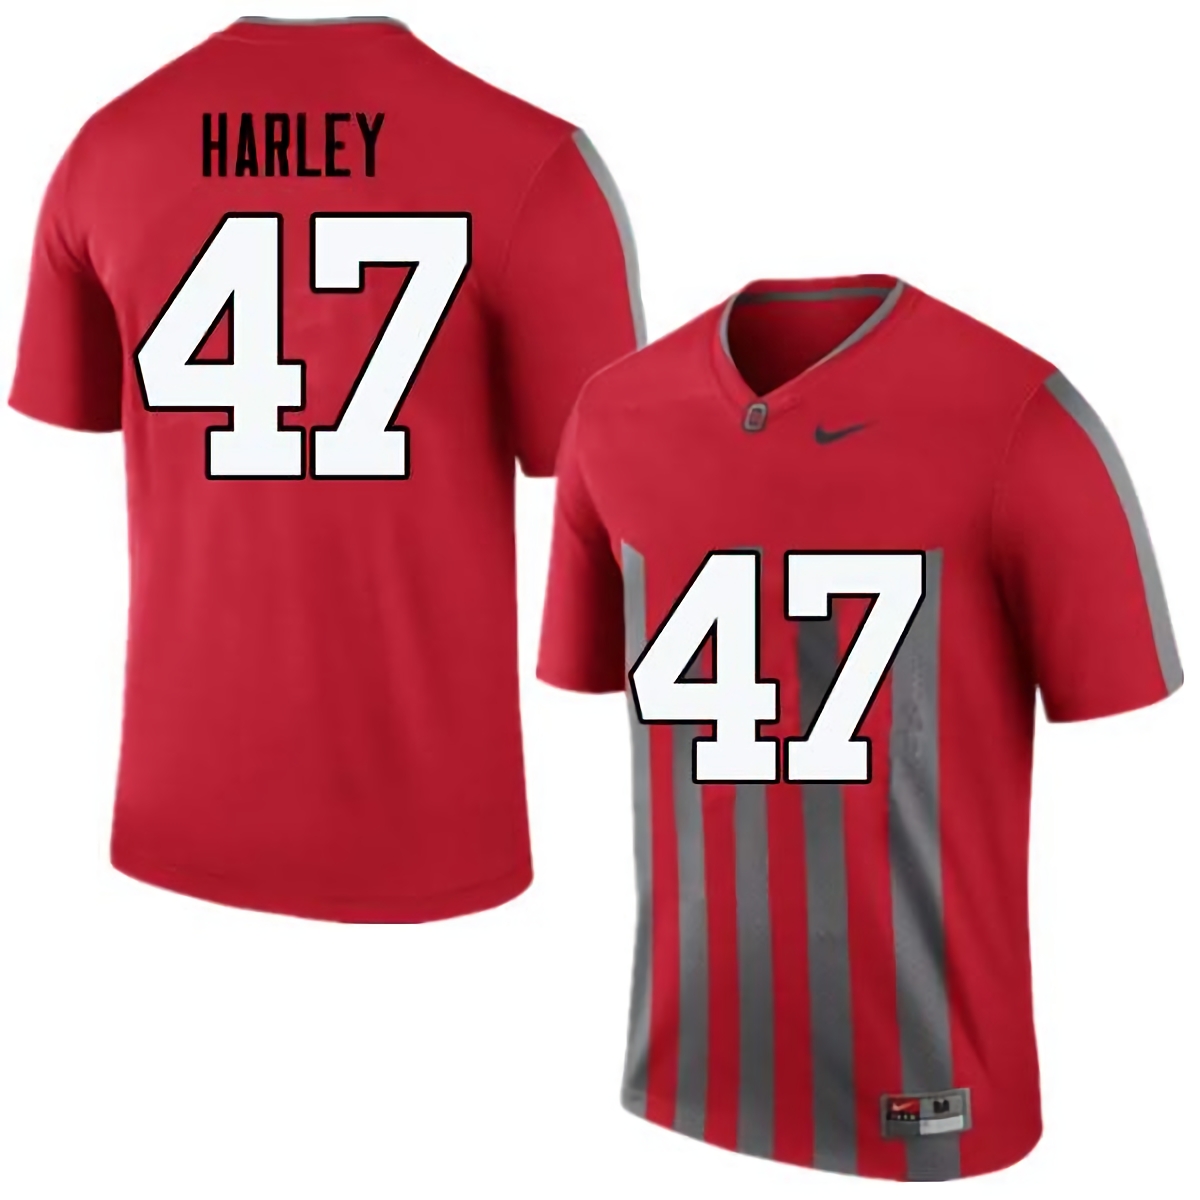 Chic Harley Ohio State Buckeyes Men's NCAA #47 Nike Throwback Red College Stitched Football Jersey GND7756AW